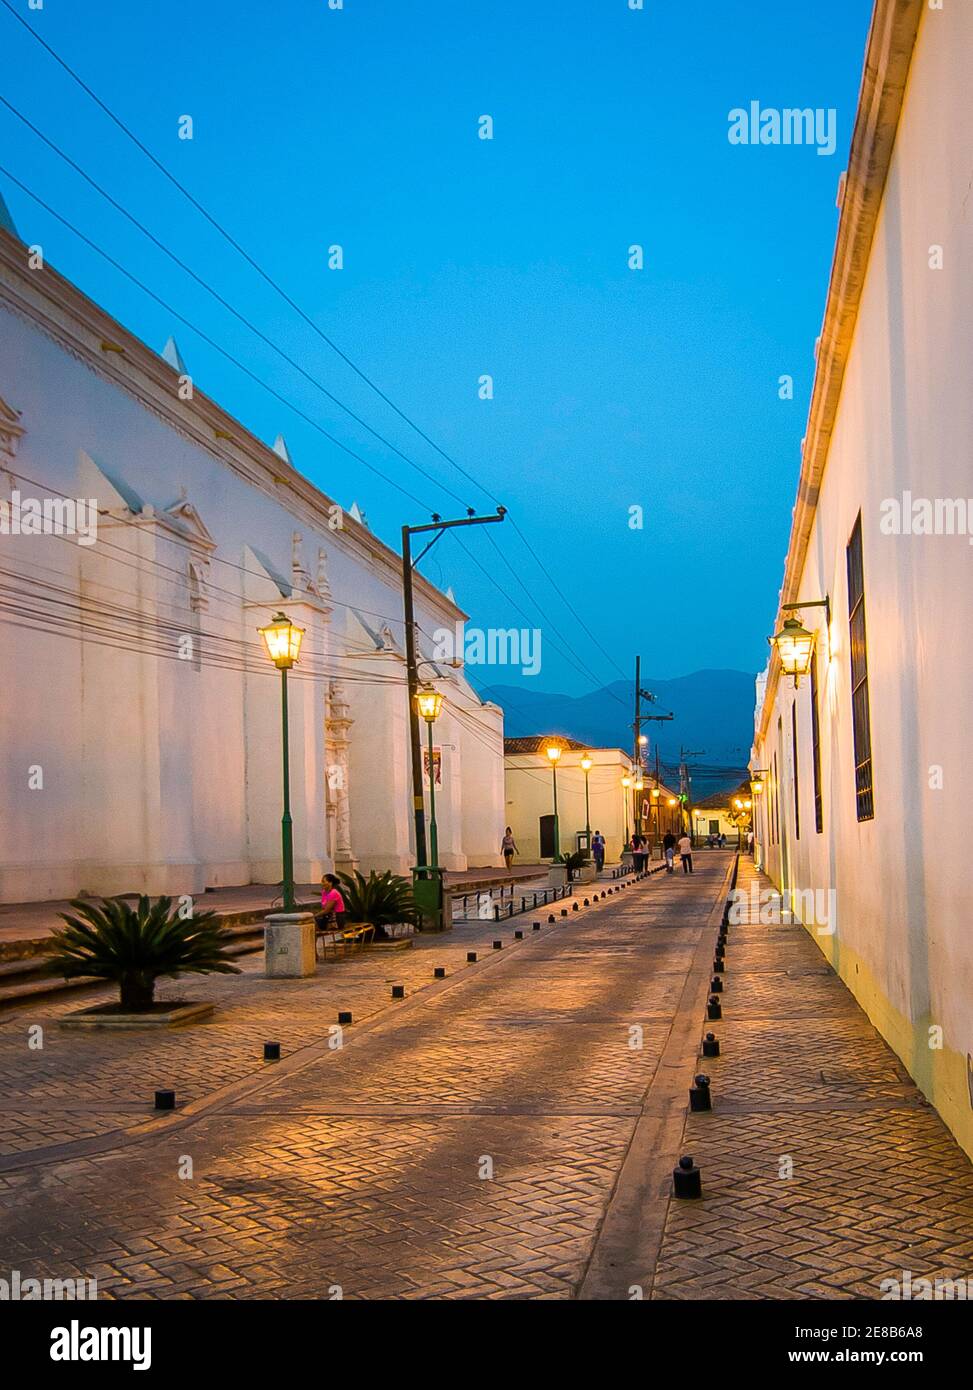 The center of the city of comayagua at night and its lights Stock Photo